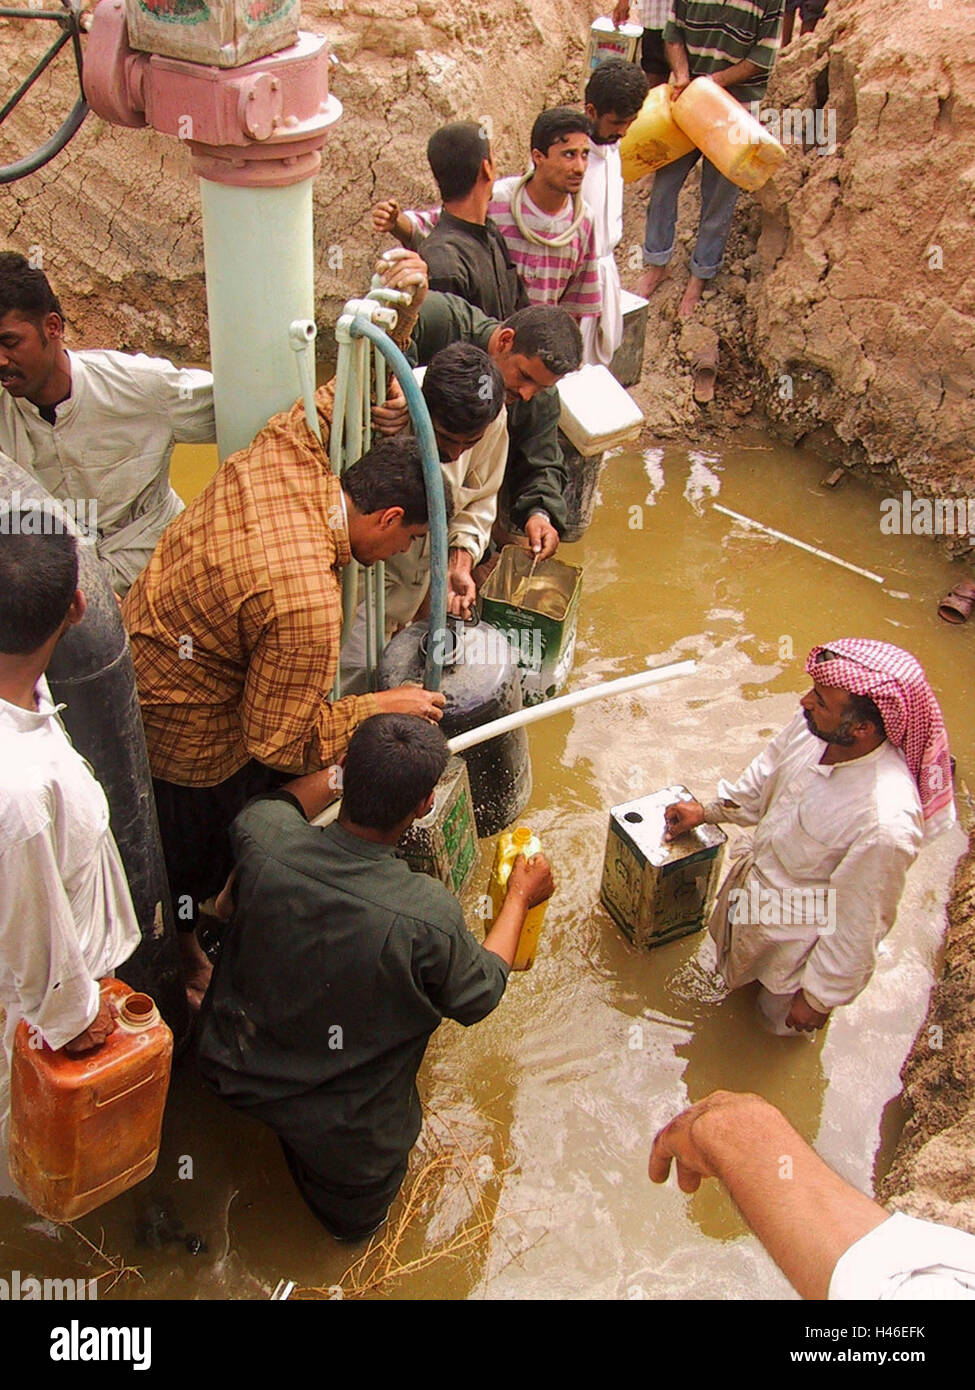 15th April 2003 Just south of Ur, near Tallil, local Iraqis use hoses to tap a pipeline and fill plastic containers with petrol. Stock Photo